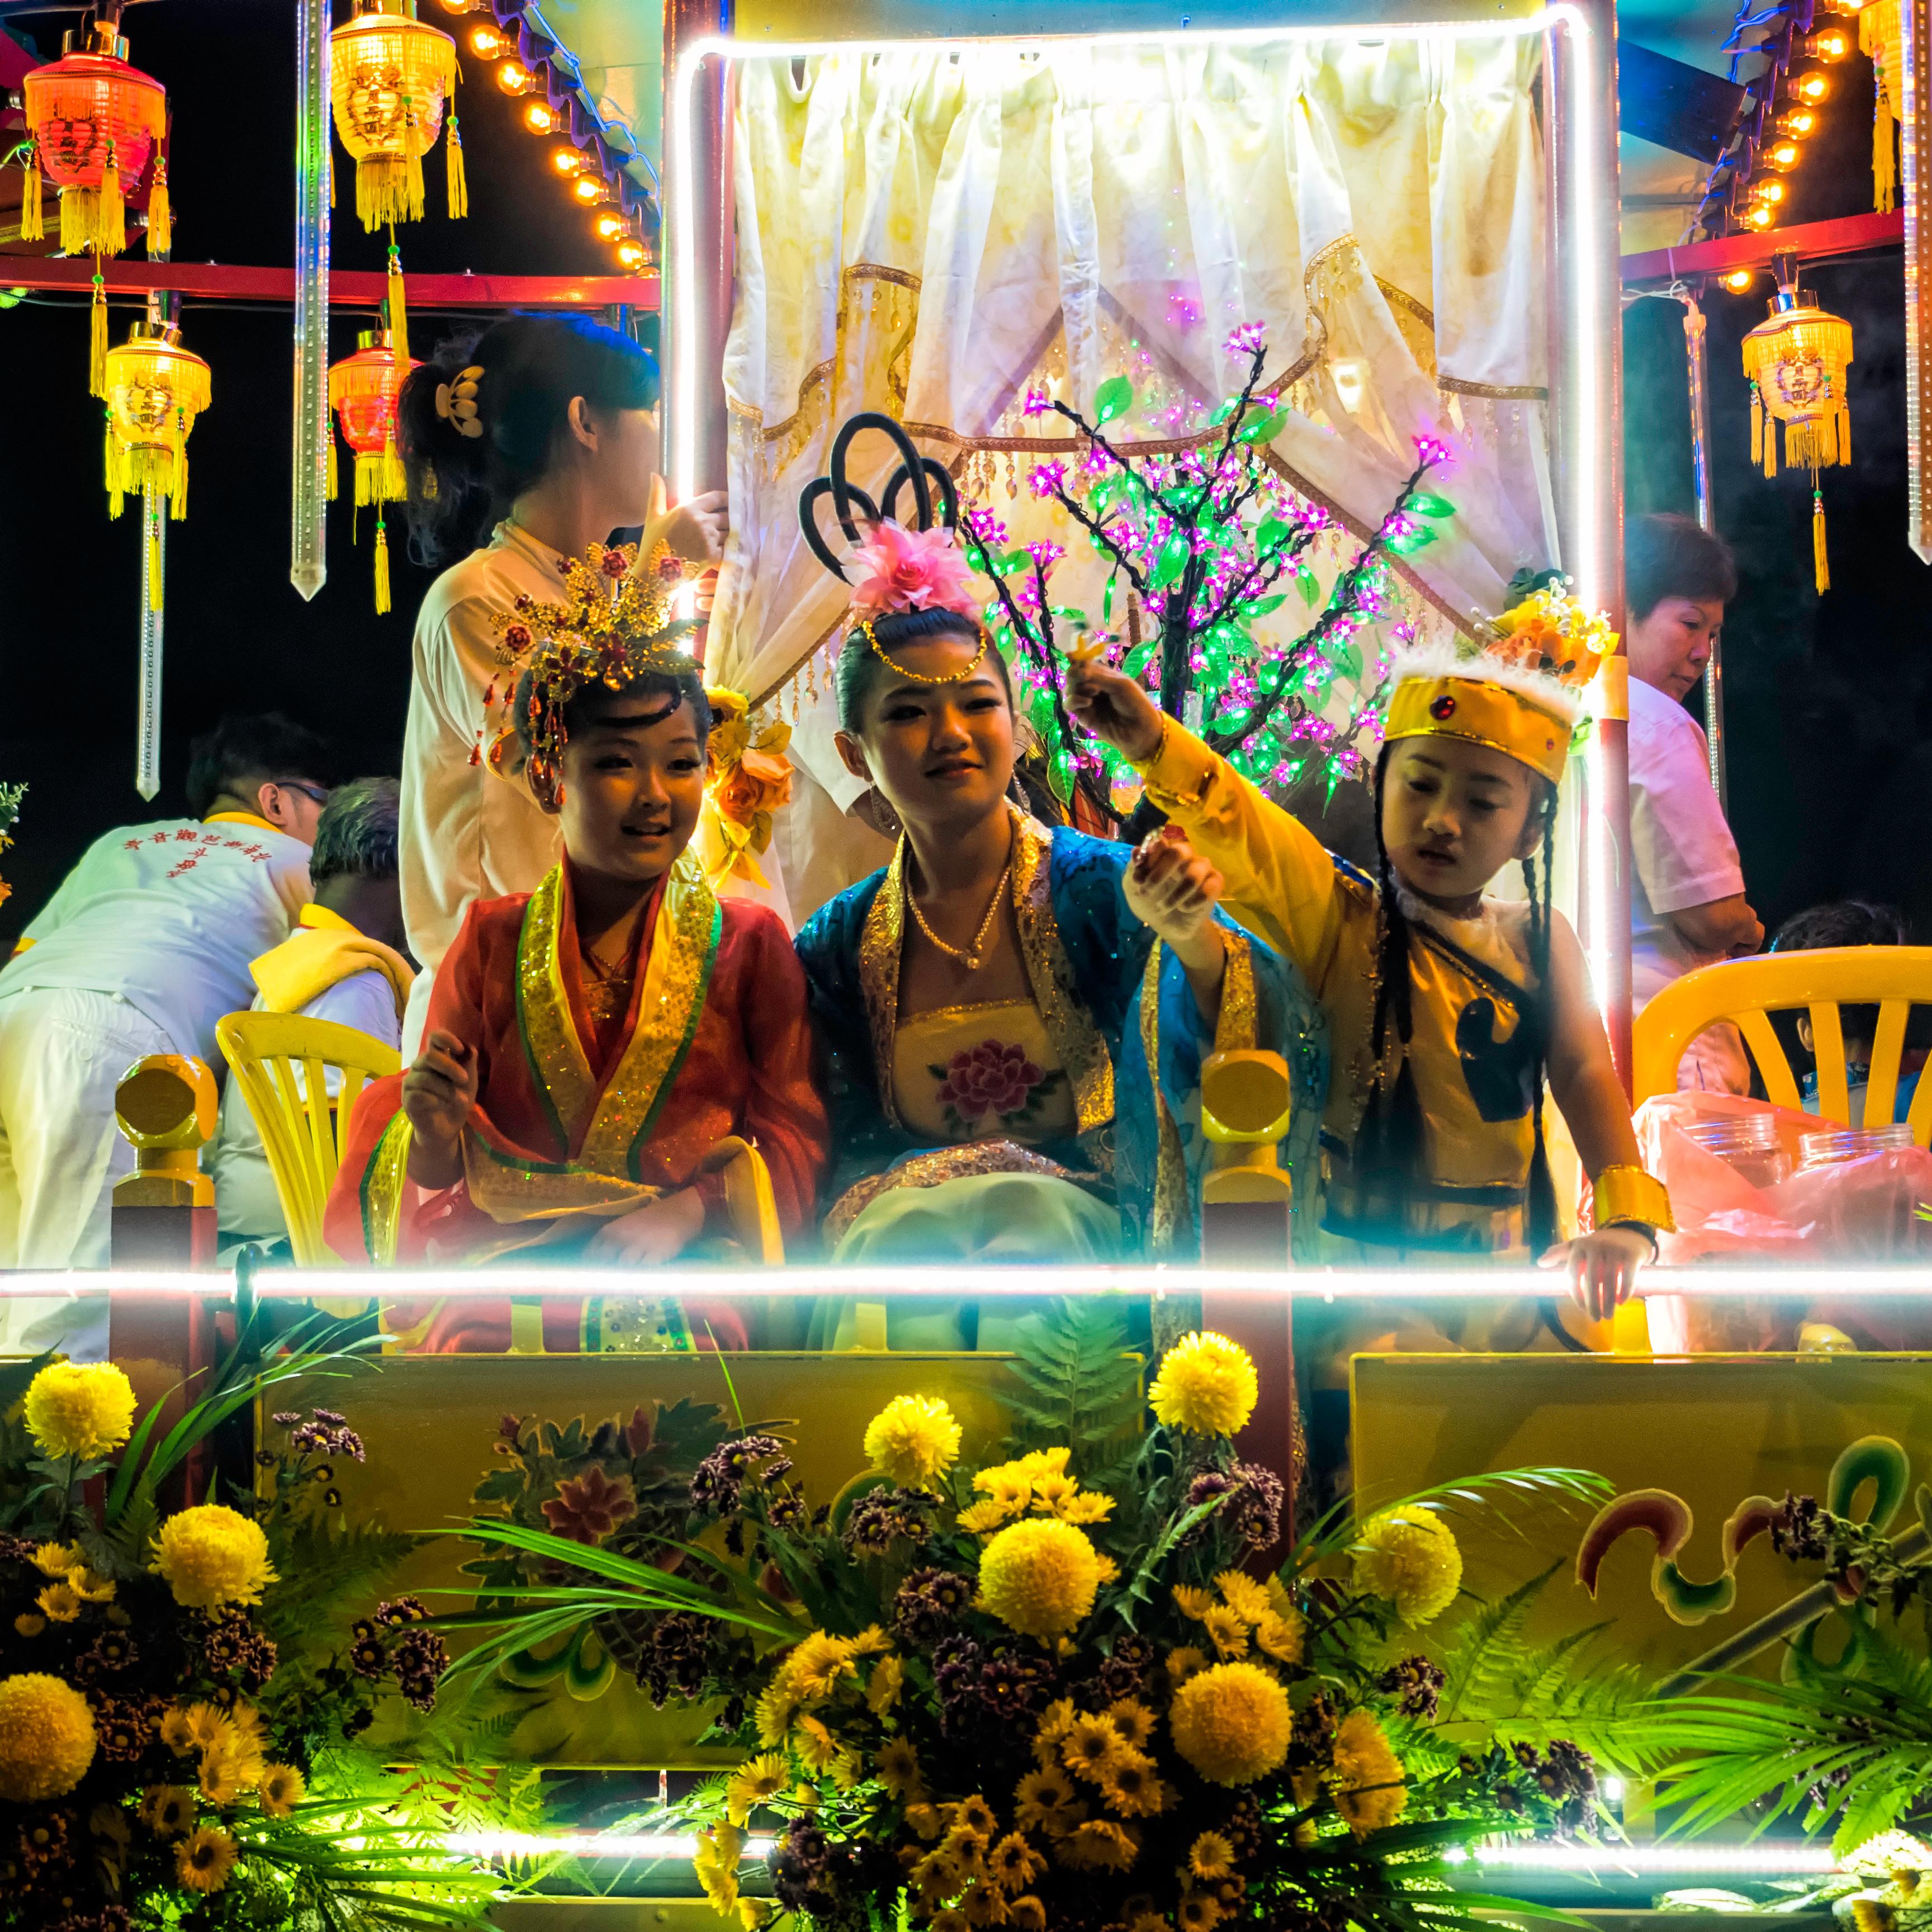 Kids dressed up to distribute candies to the bystanders in a parade during the Nine Emperor Gods festival which is celebrated on the ninth month in the lunar calendar each year in Malaysia. Foto: Zhu Lin Ch'ng, Malaysia, Shortlist, Culture, Youth, 2015 Sony World Photography Awards